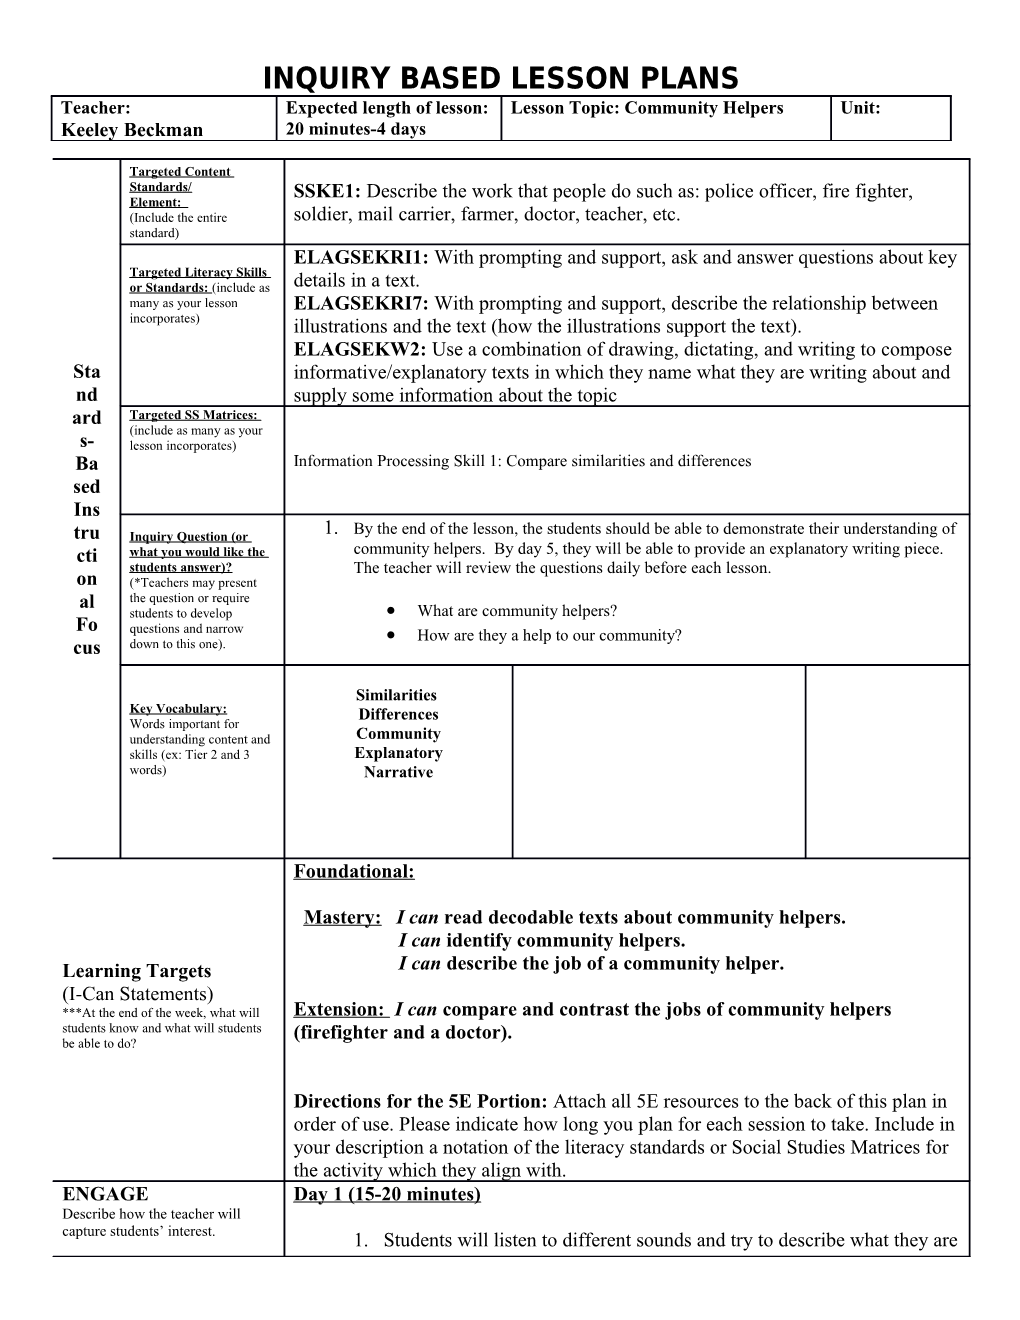 Inquiry Based Lesson Plans